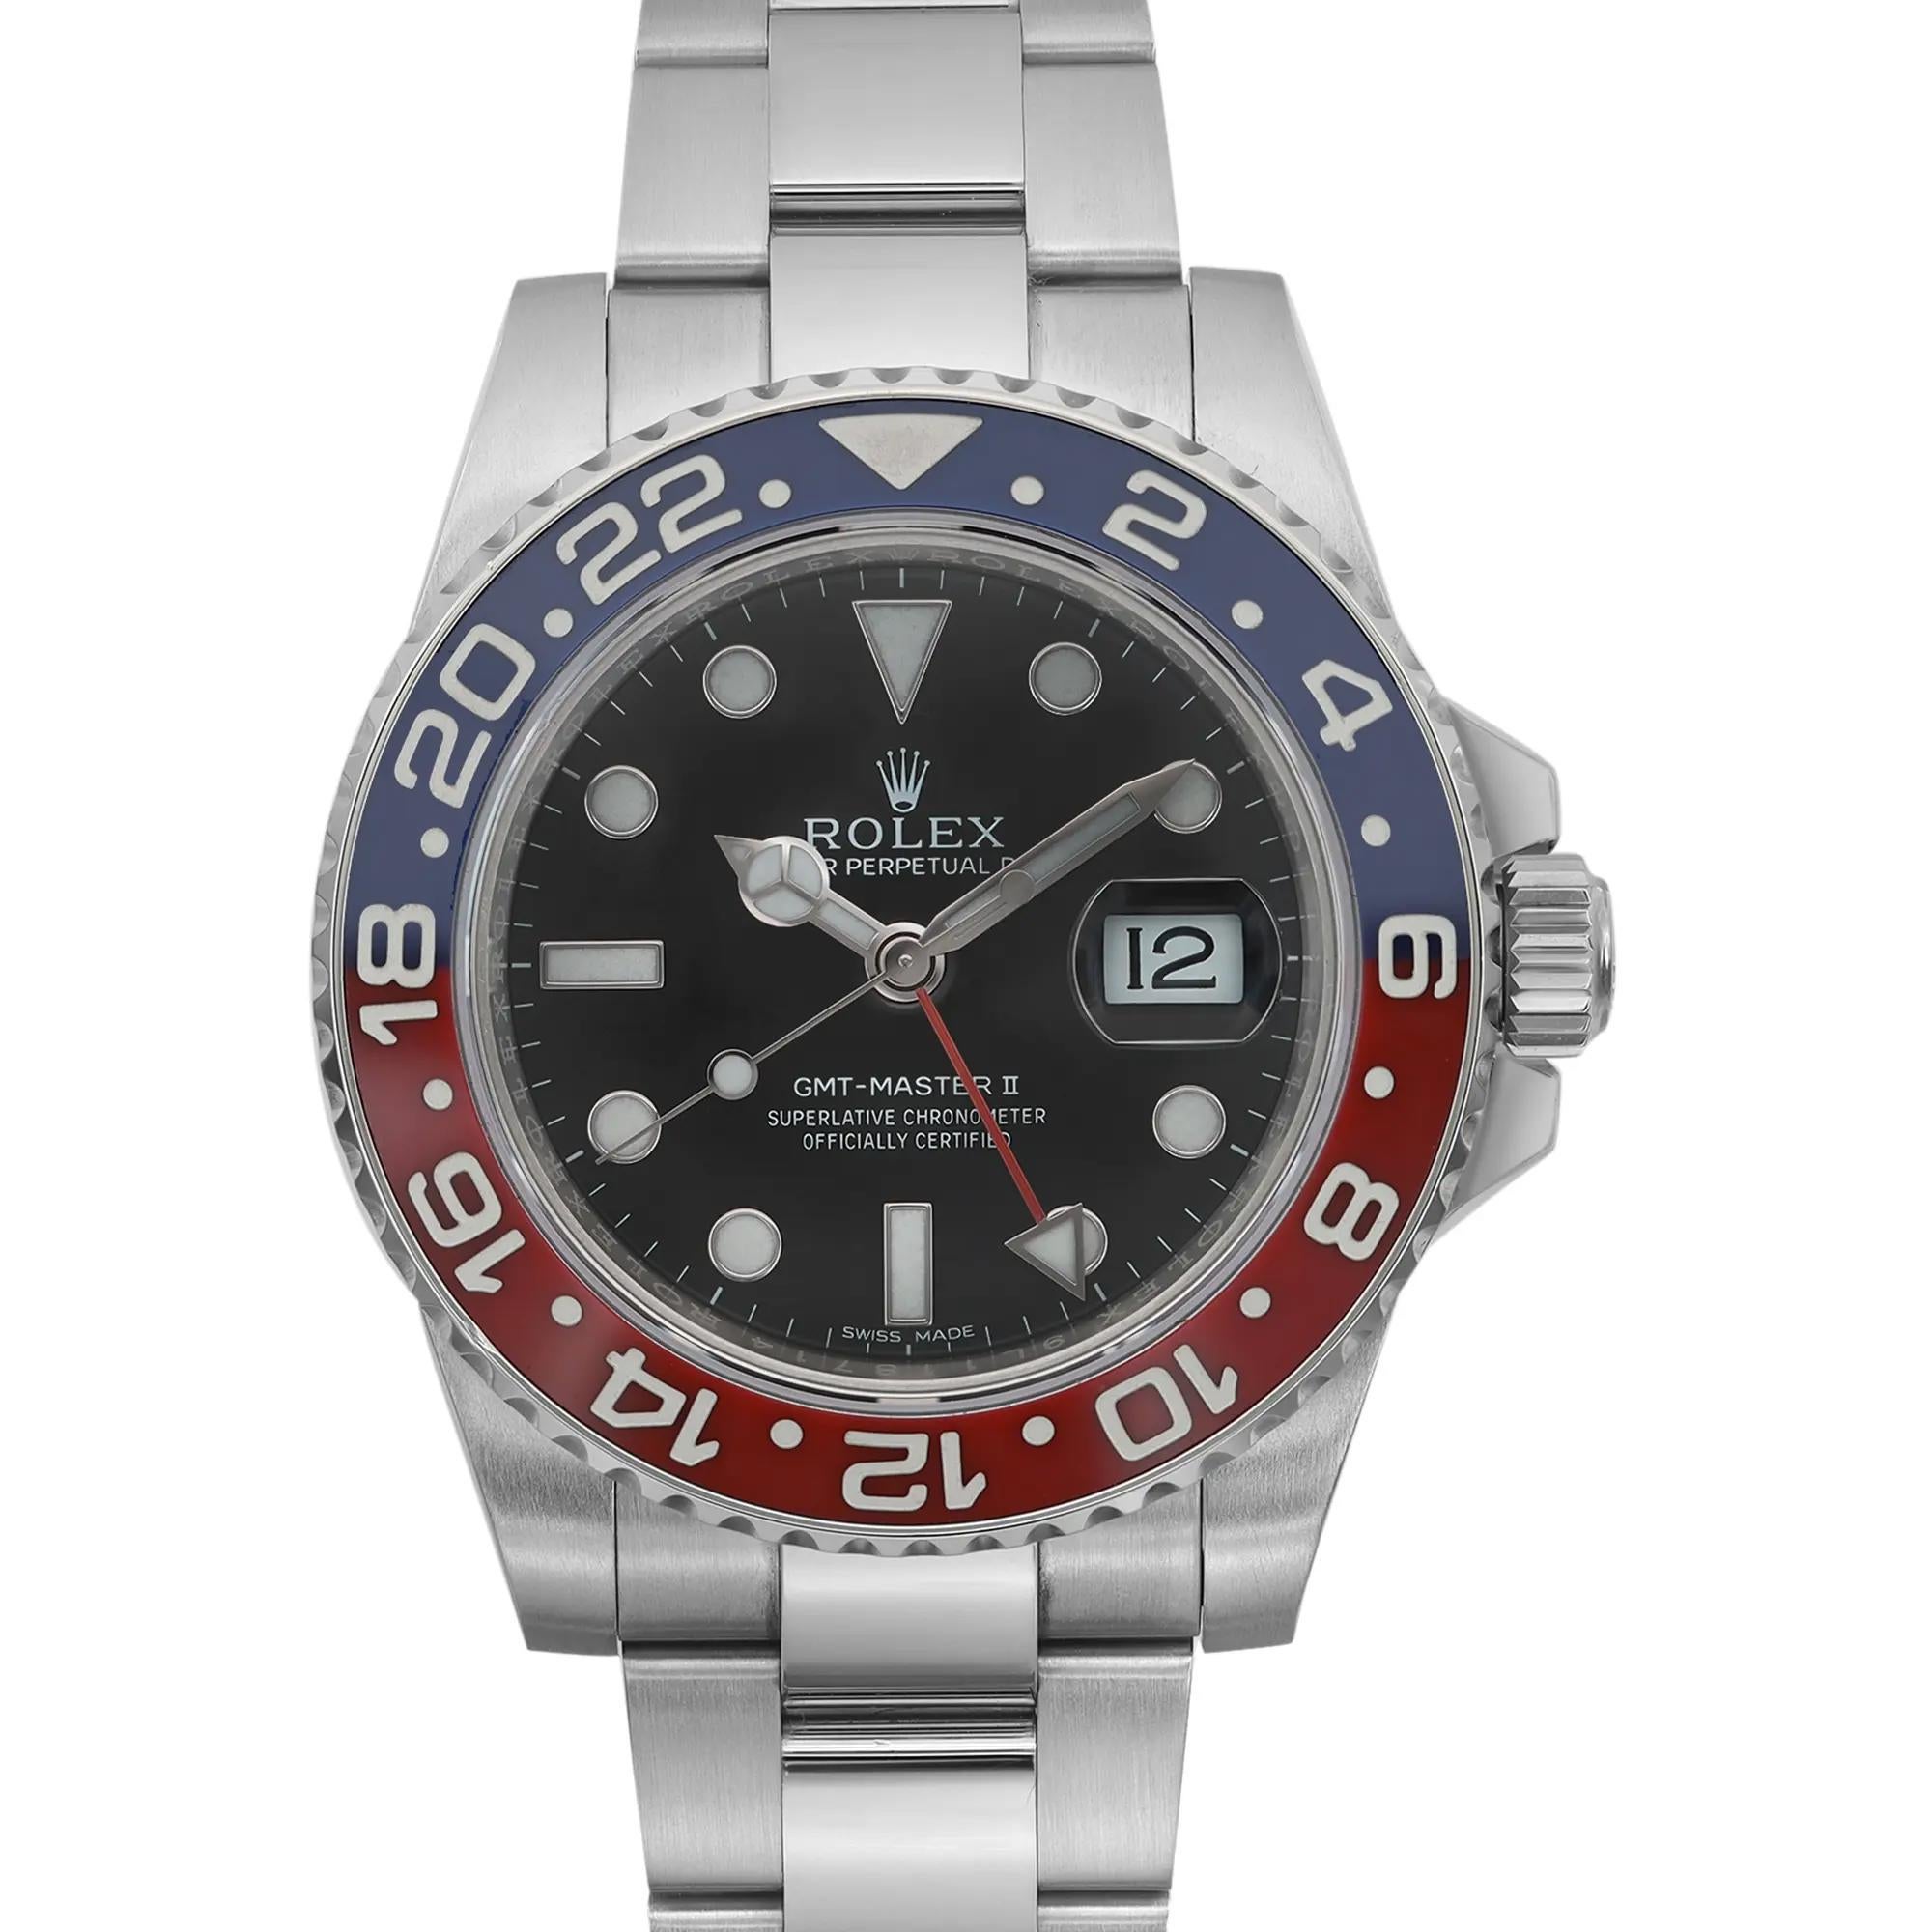 Pre-owned in mint condition. Comes with an original box, a 2017 card and a Rolex service card. 

Rolex GMT-Master II 116719

Brand & Model
Brand: Rolex
Model: Rolex GMT-Master II 116719
Model Number: 116719

Specifications
Type: